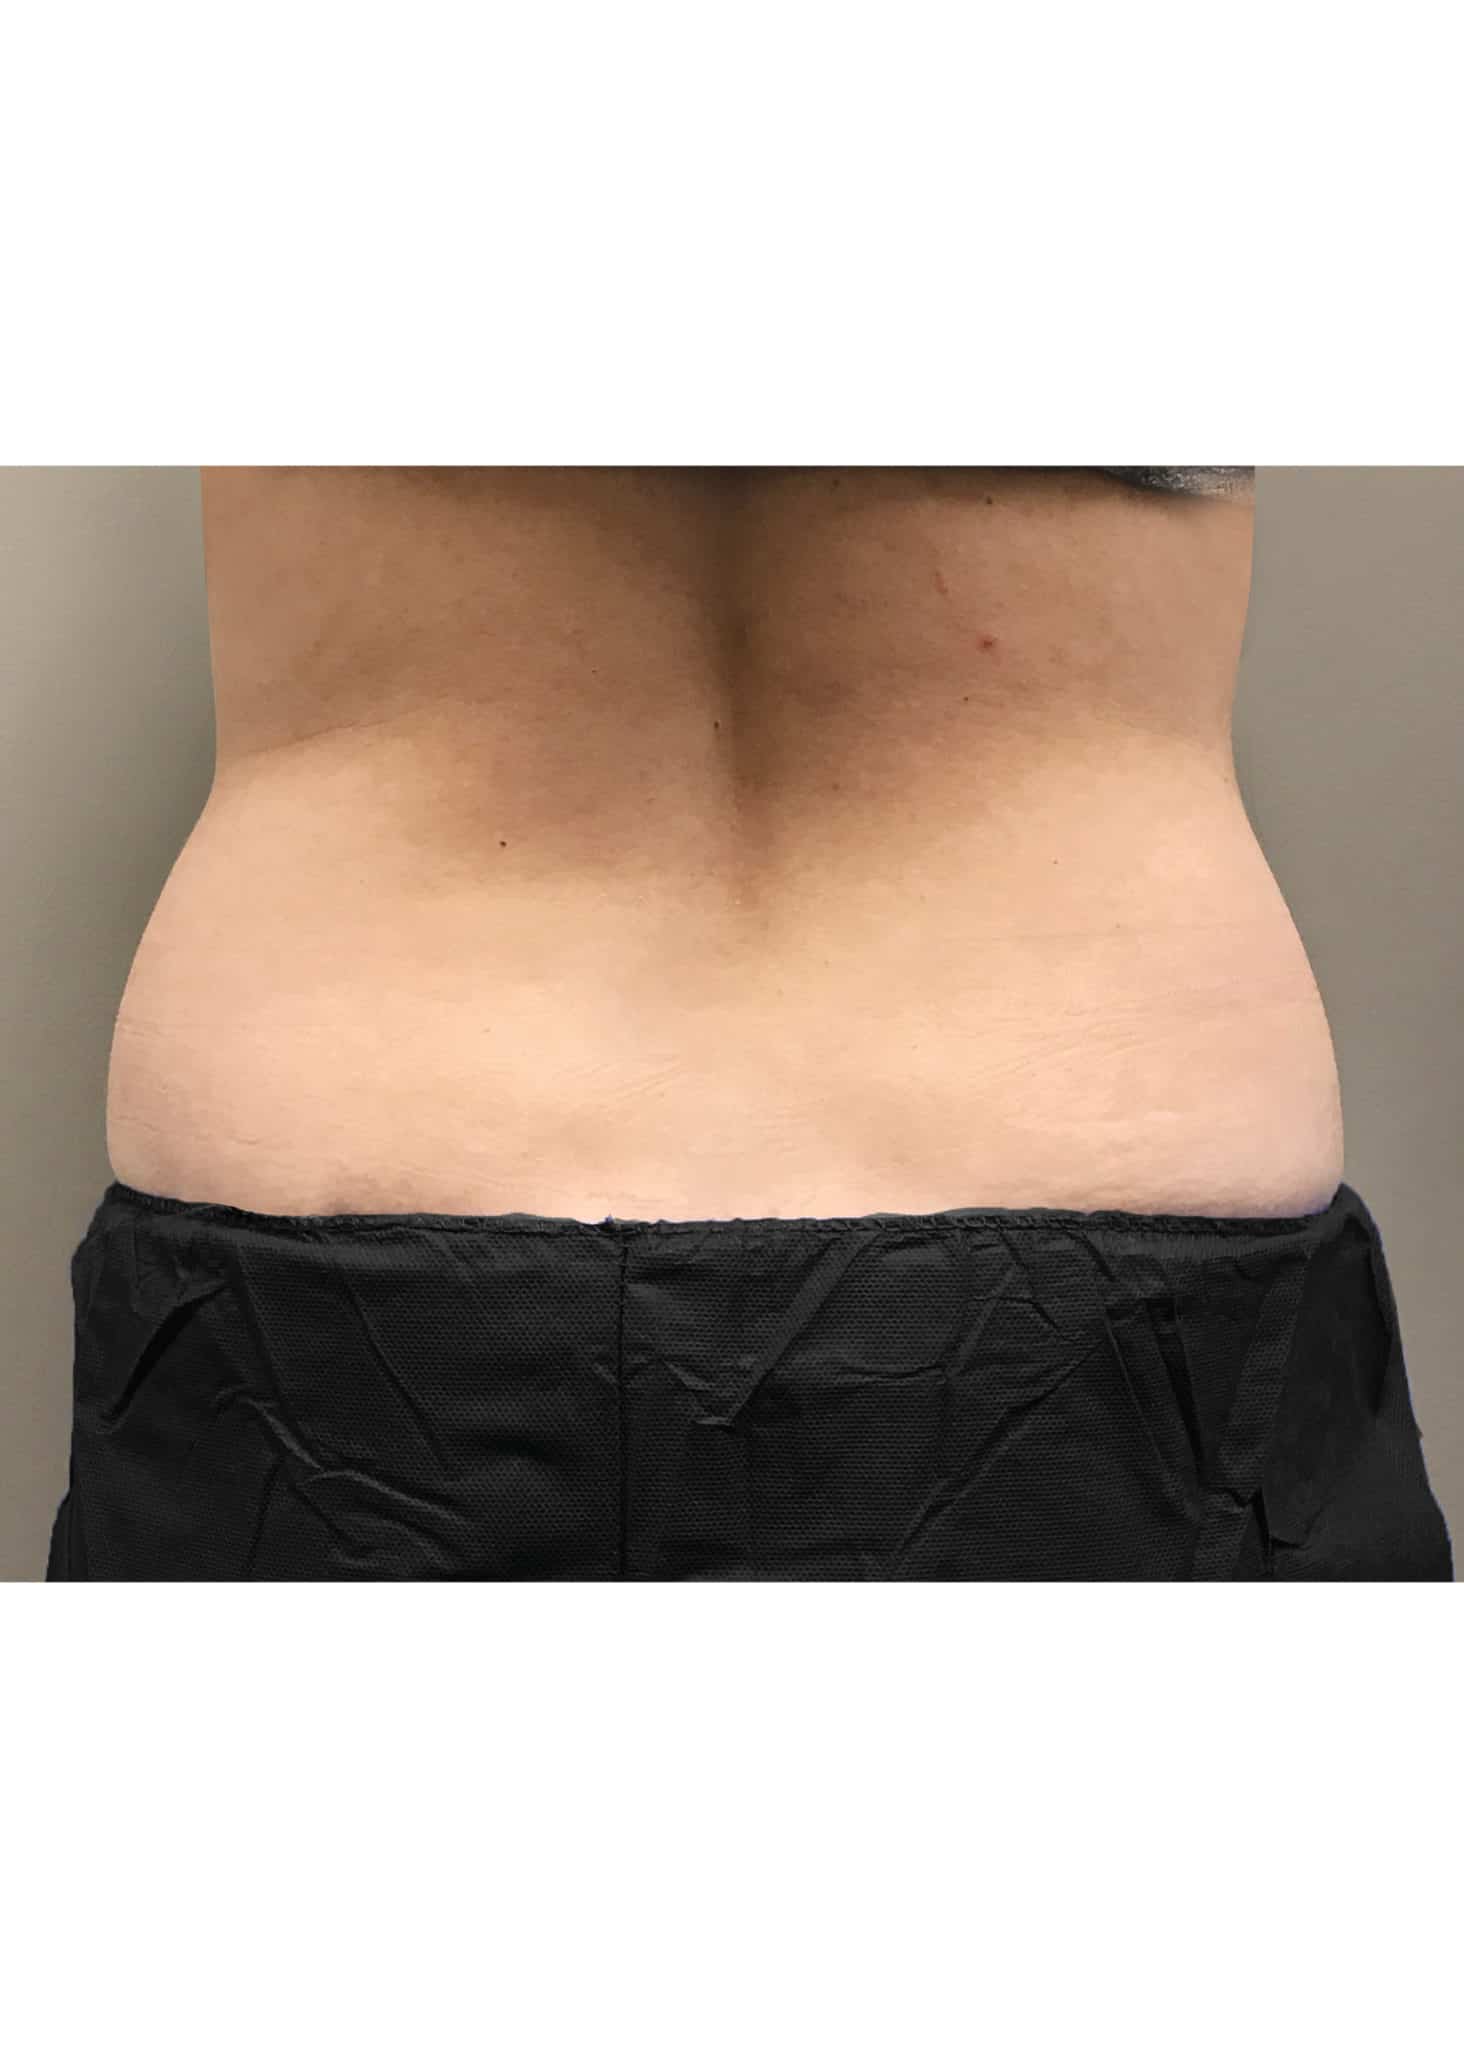 TheSkinCenter ProviderPages BobbiNaples CoolSculpting Before 1 1464x2048 2